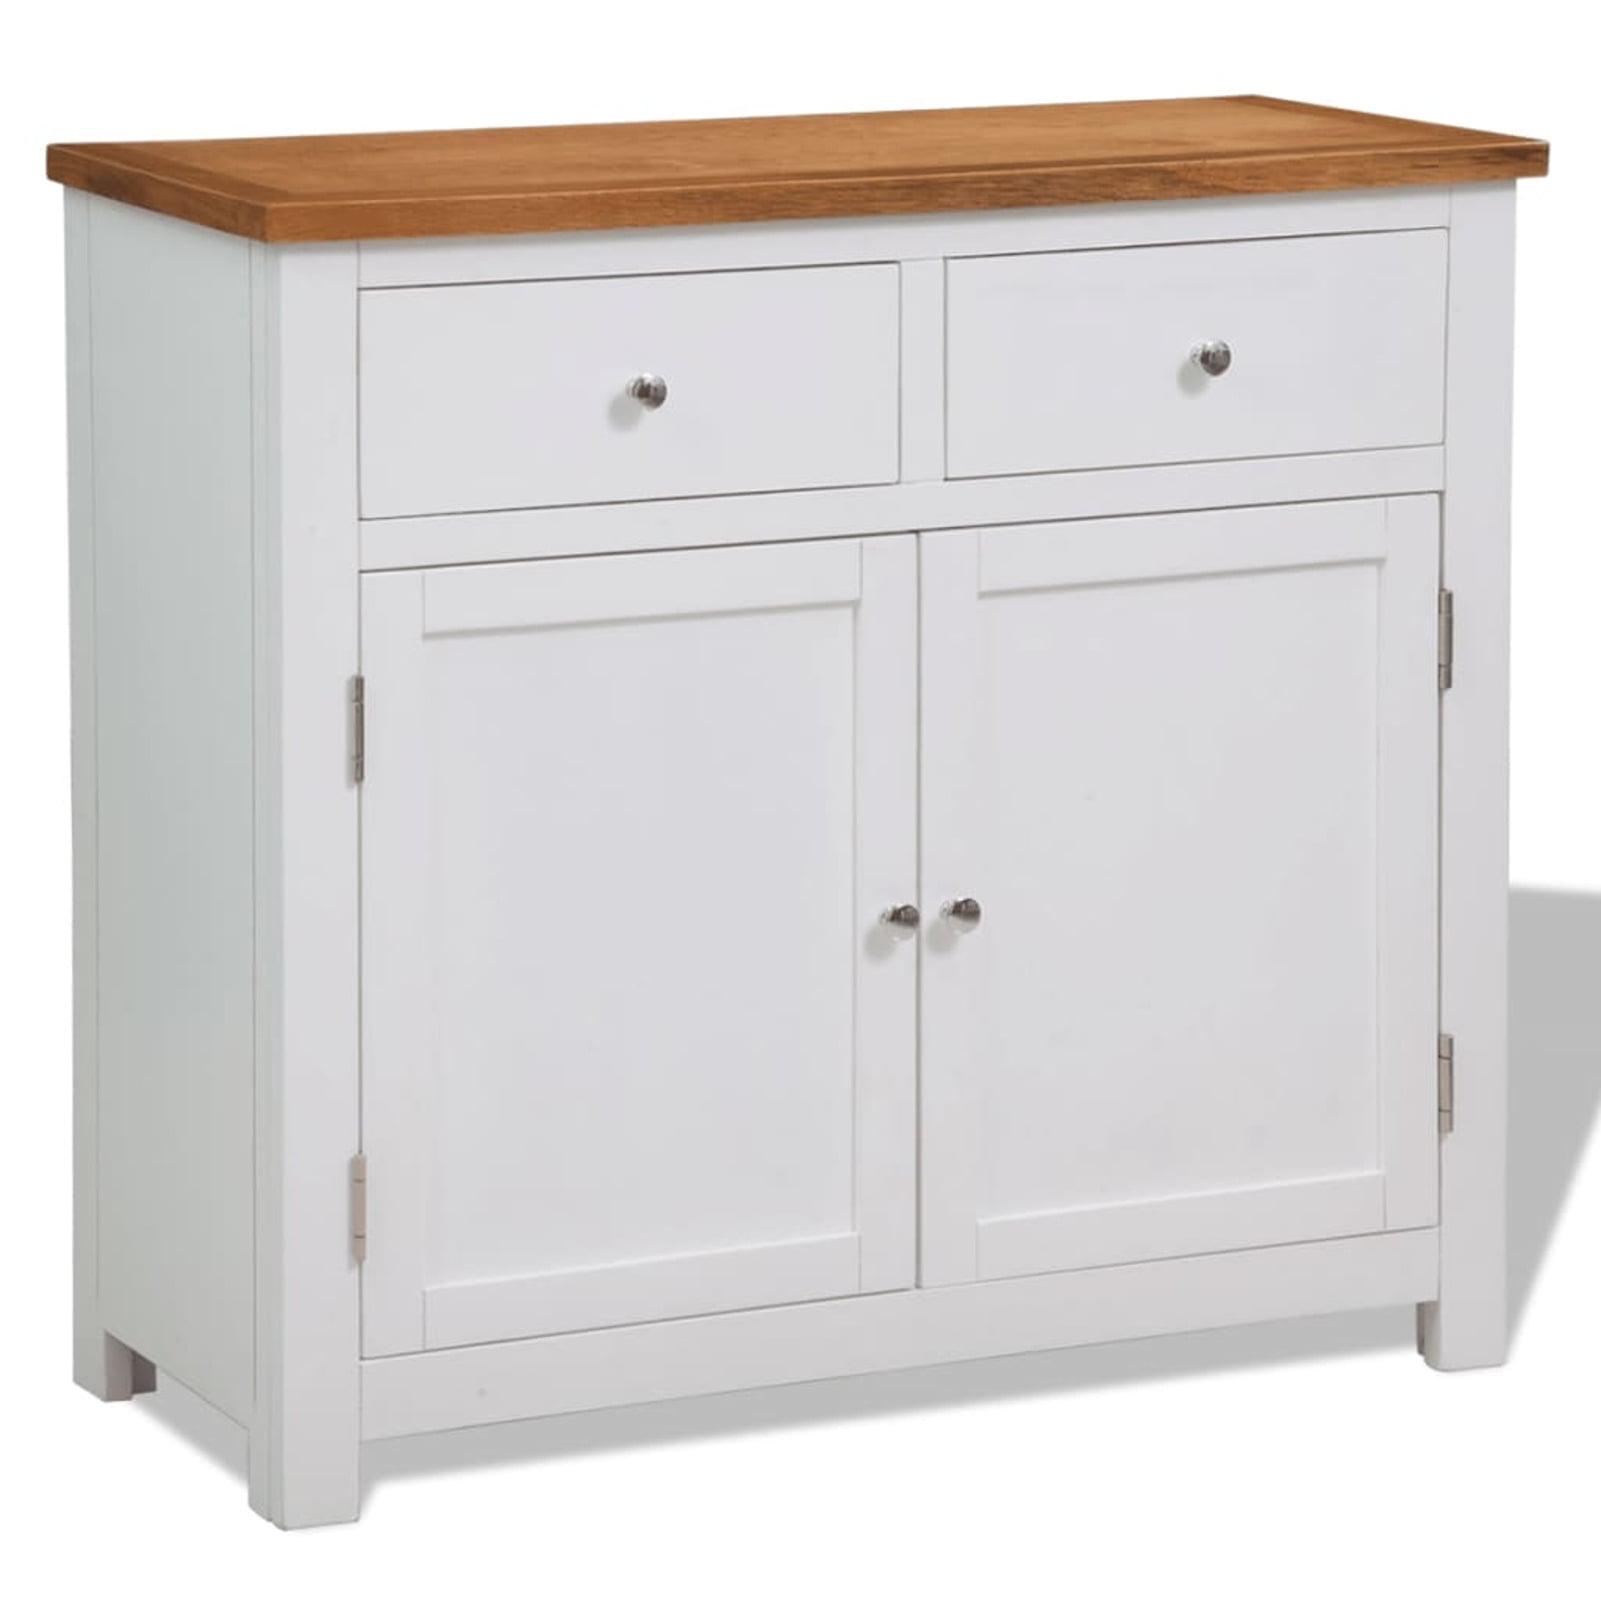 Solid Oak and Acacia Wood Rustic Sideboard with Metal Knobs